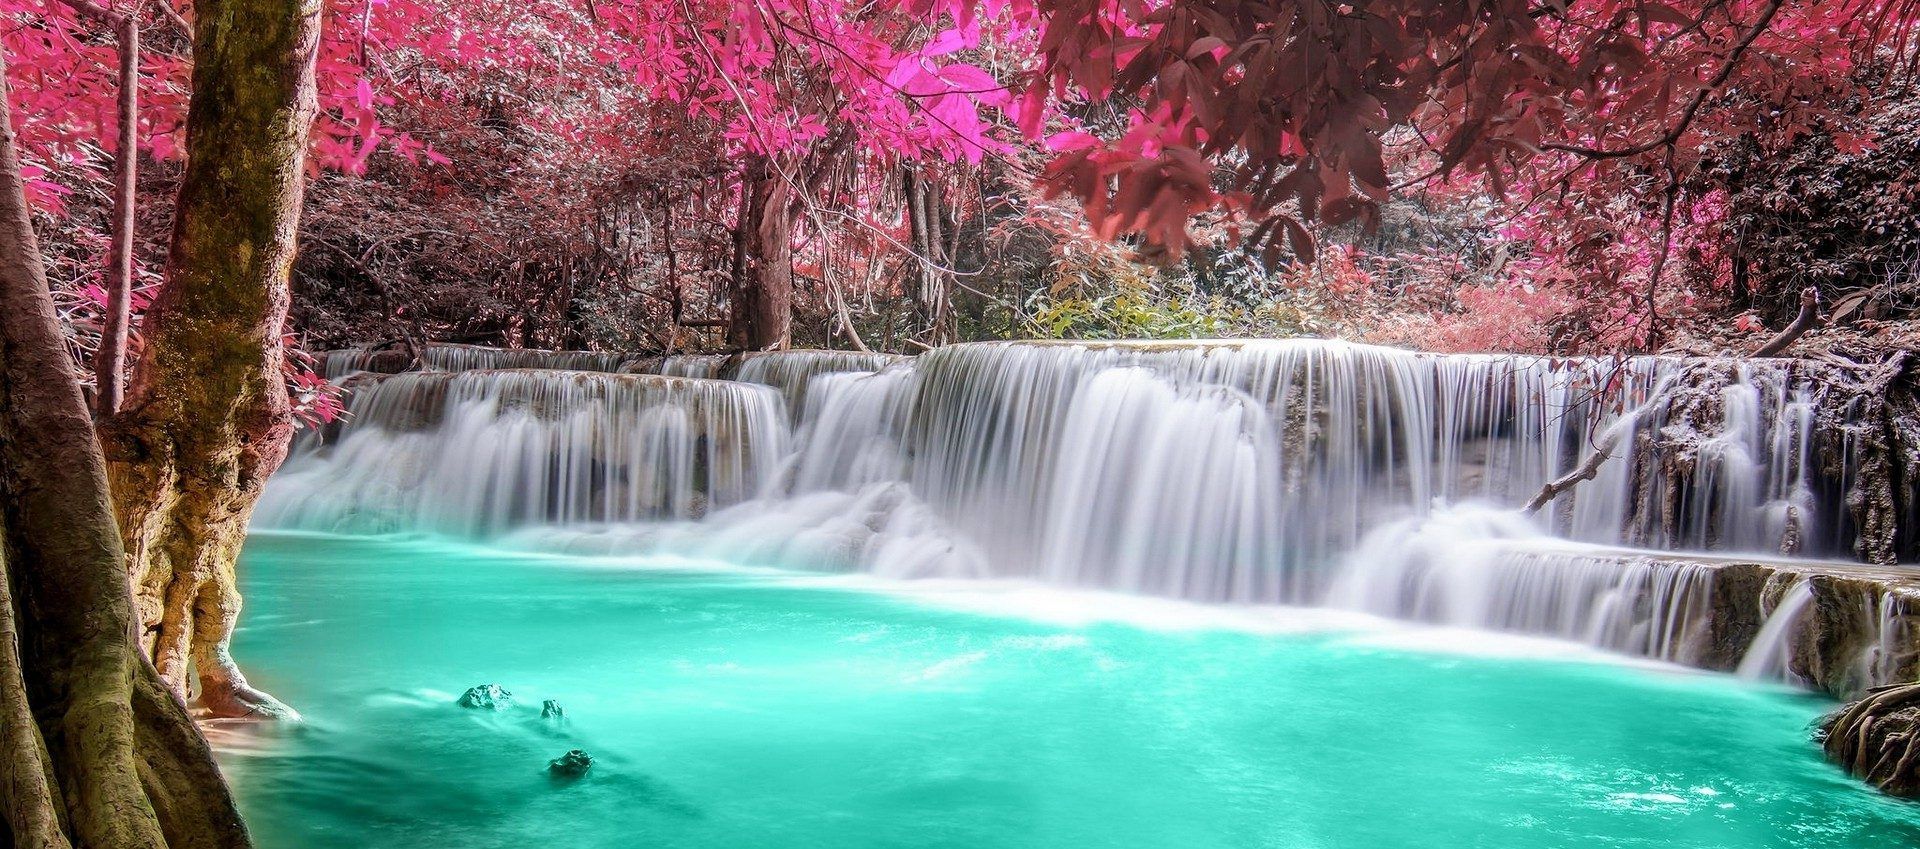 Cropped Colorful Waterfall Wallpaper Mobile Tropical